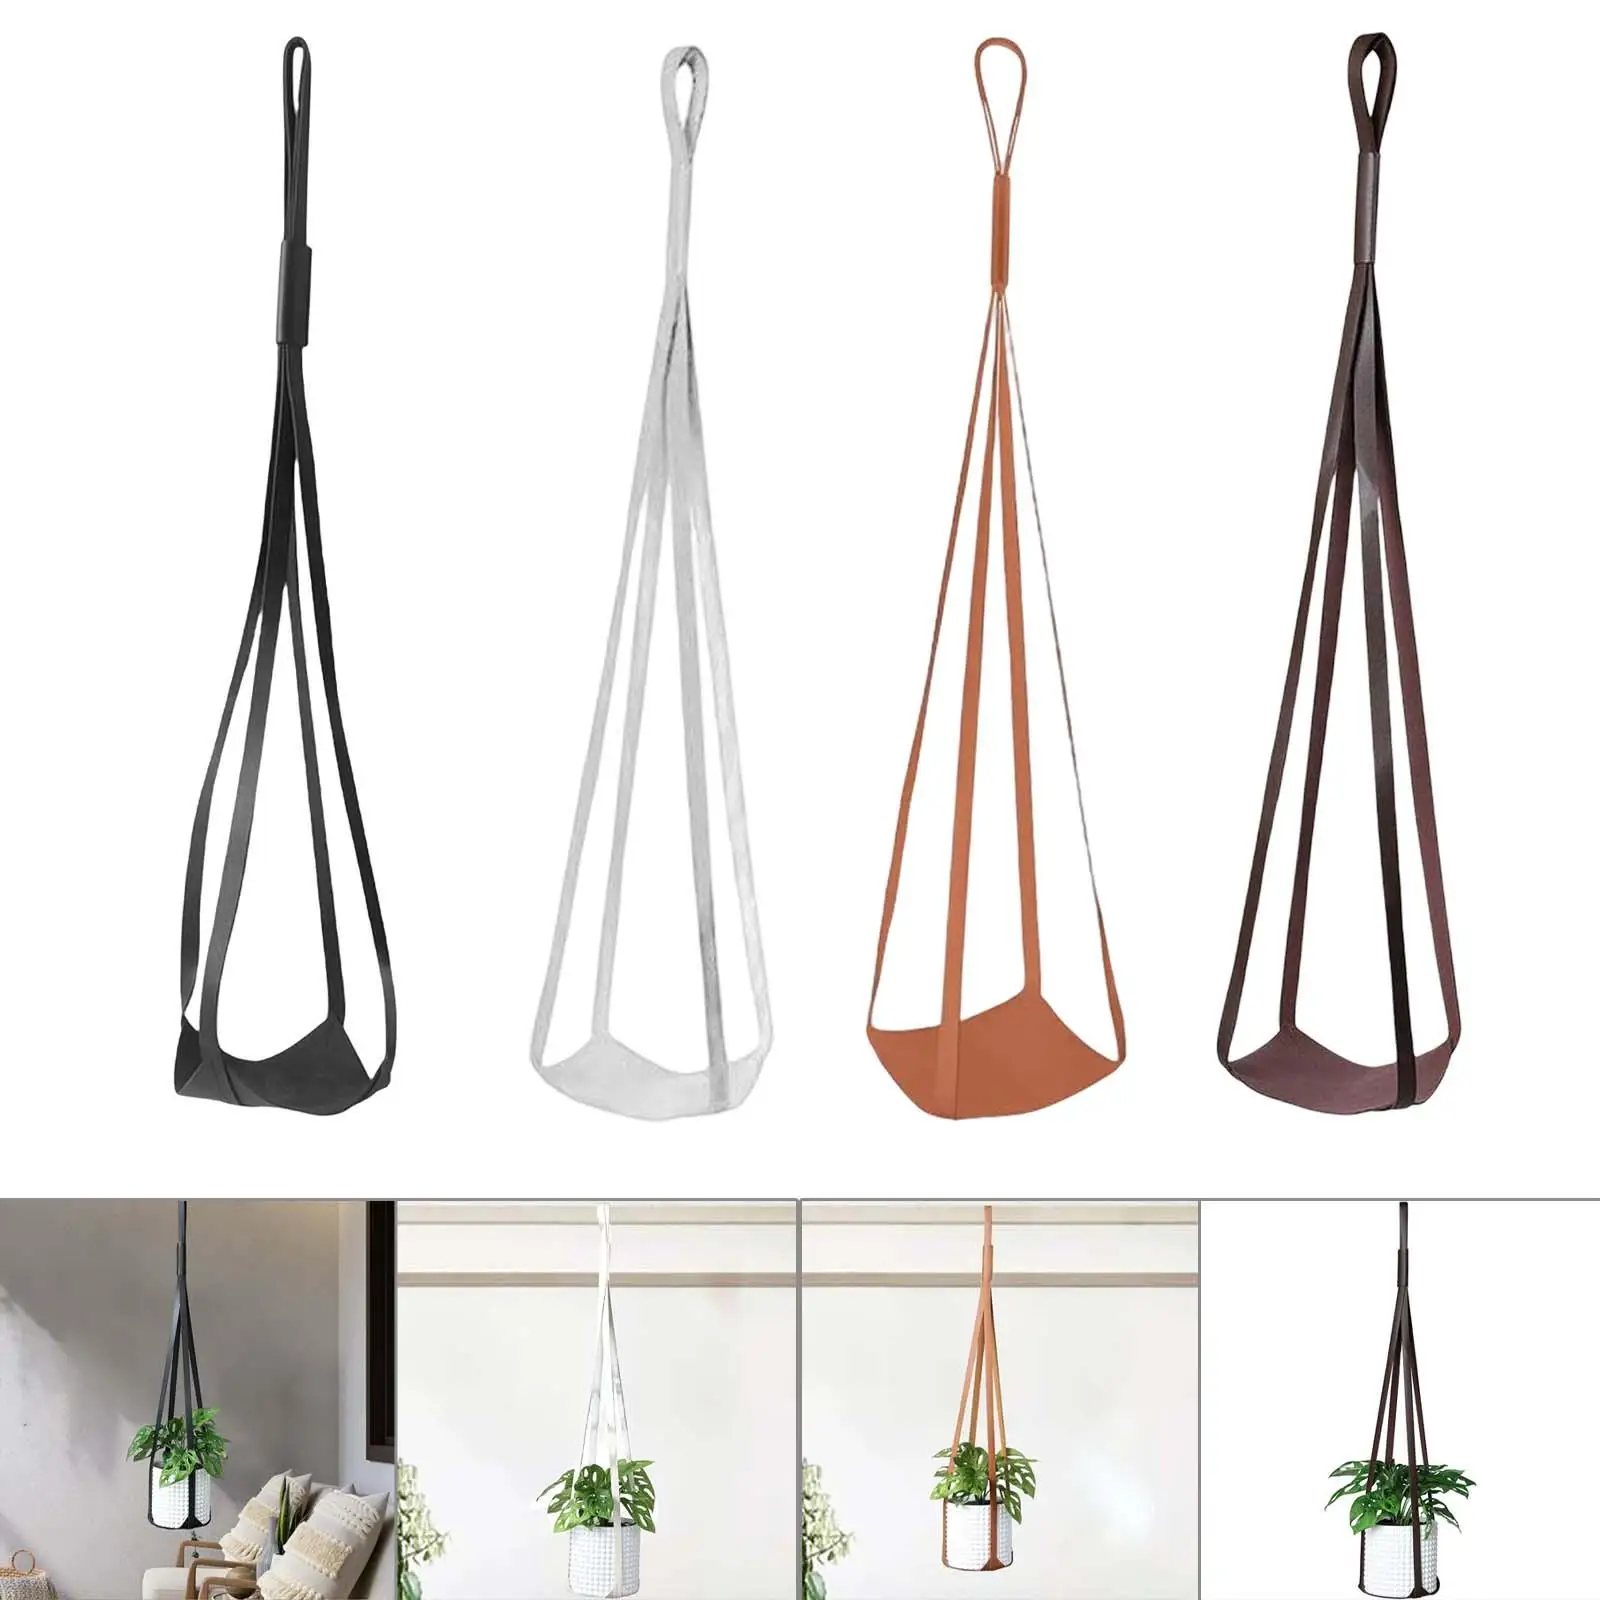 Hanging Planter Holder Morden style for Wall Patio Outdoor Outdoor